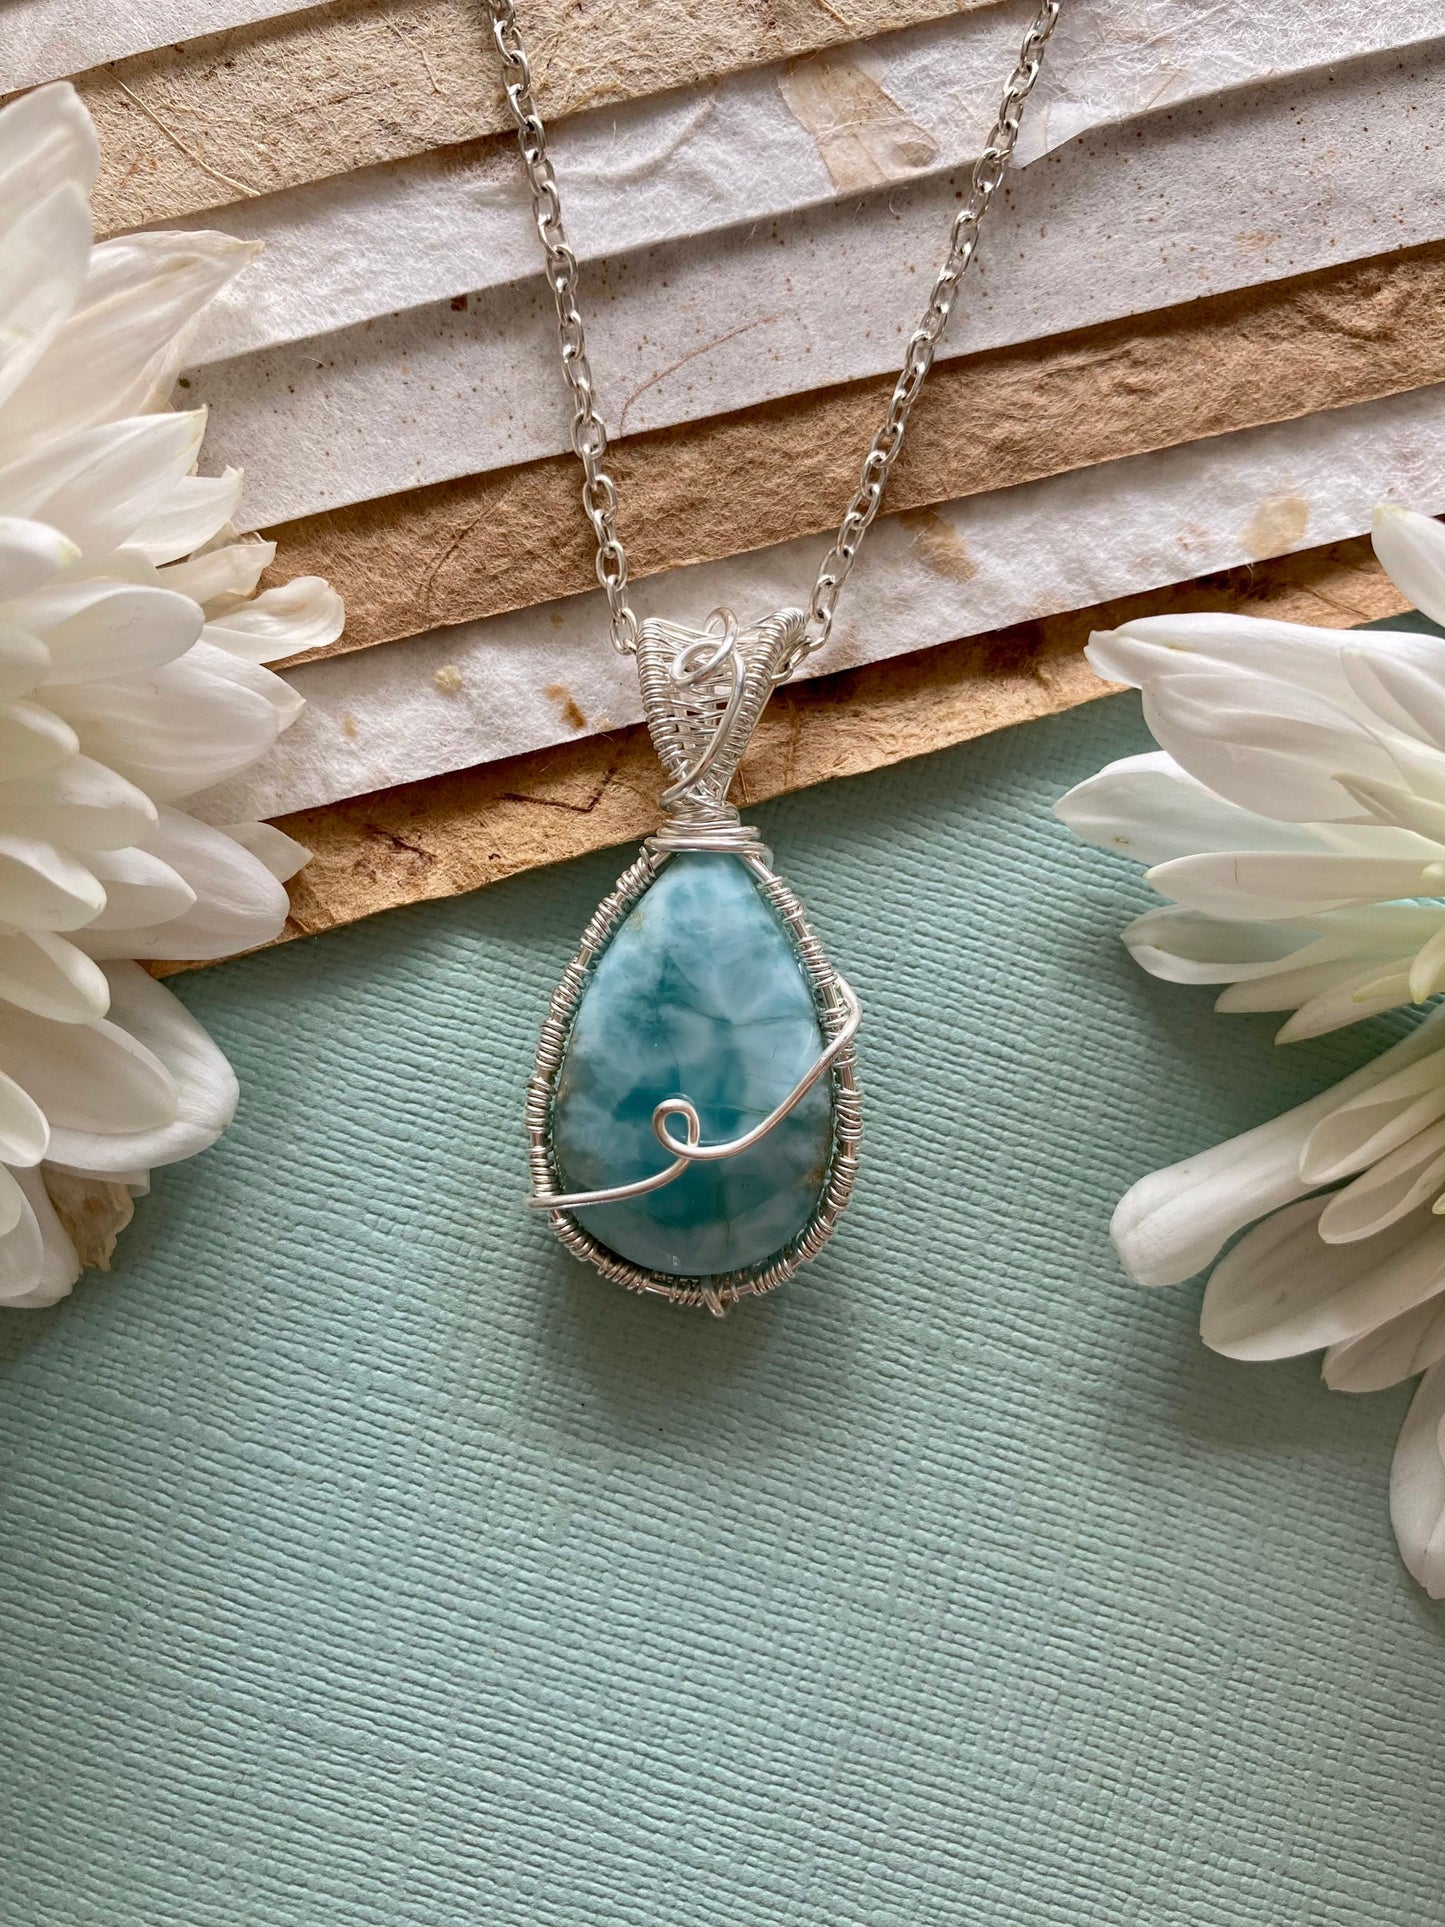 Larimar pendant handmade necklace wire wrapped natural stone with 18 inch length chain